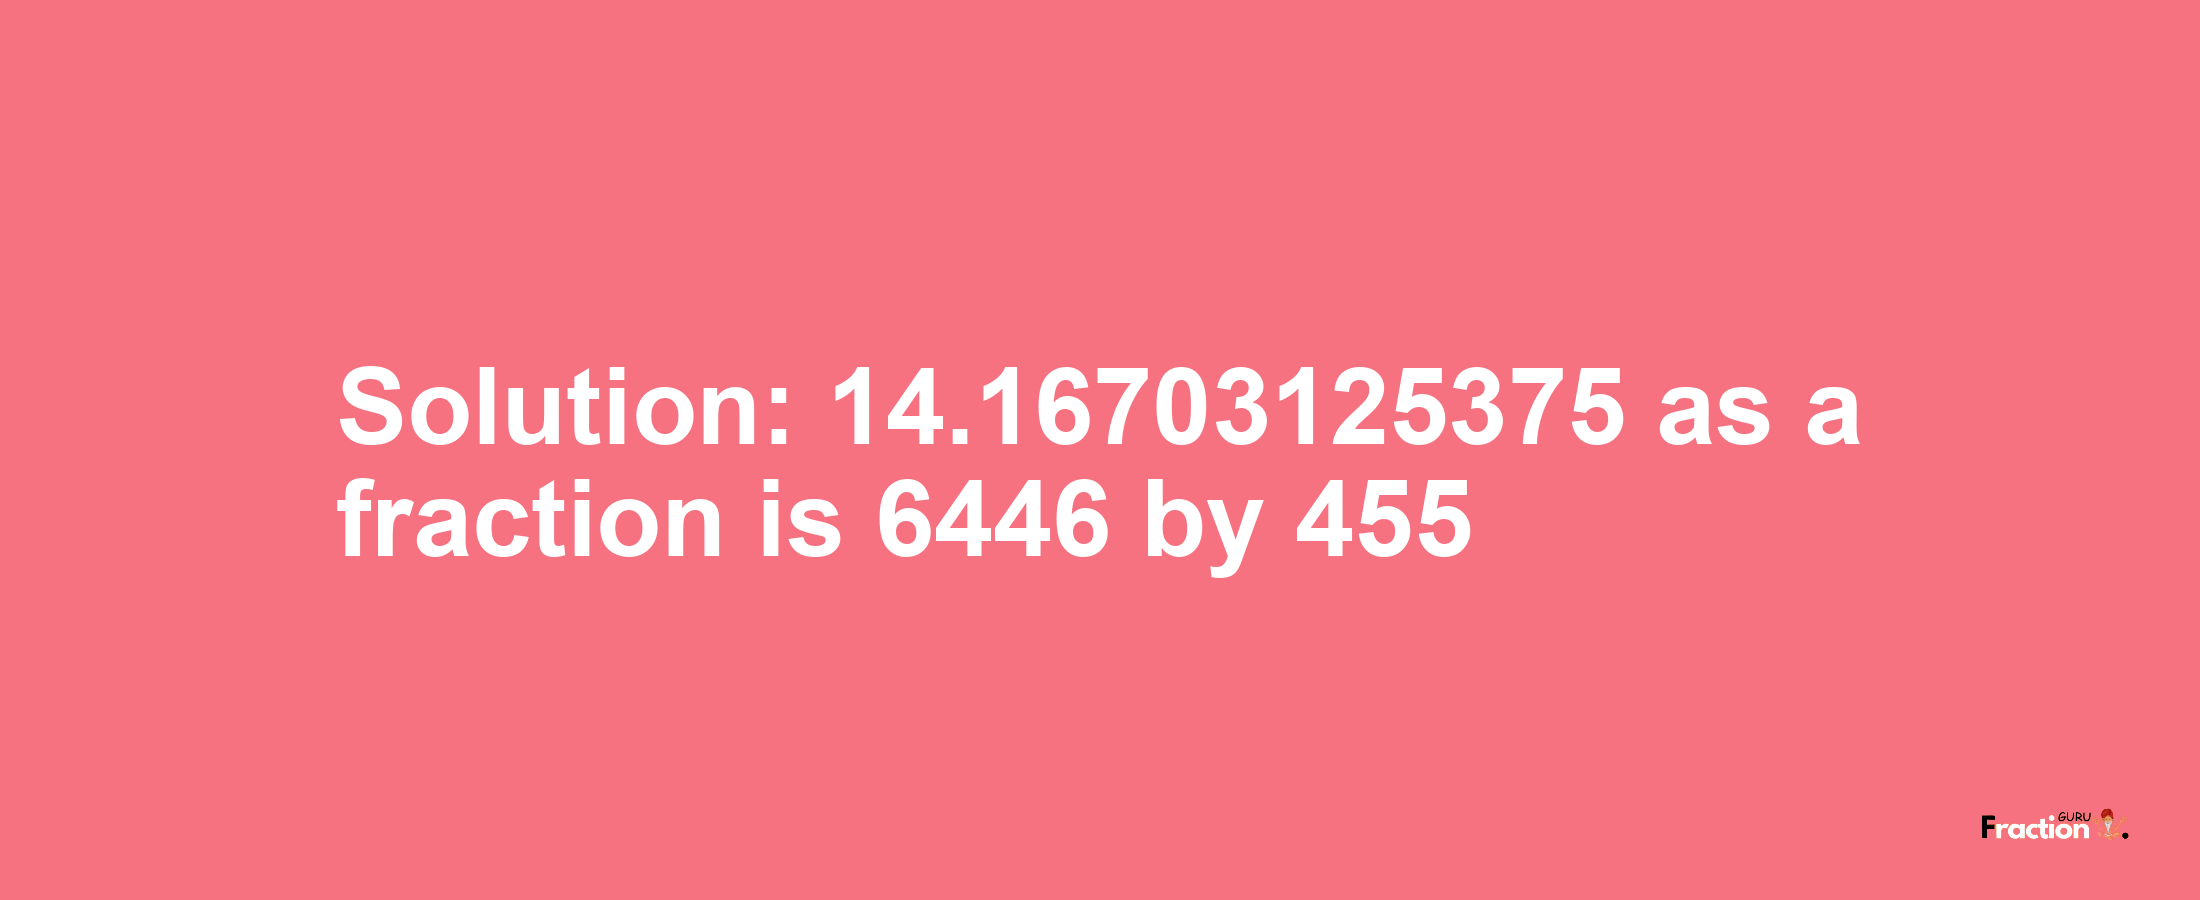 Solution:14.16703125375 as a fraction is 6446/455